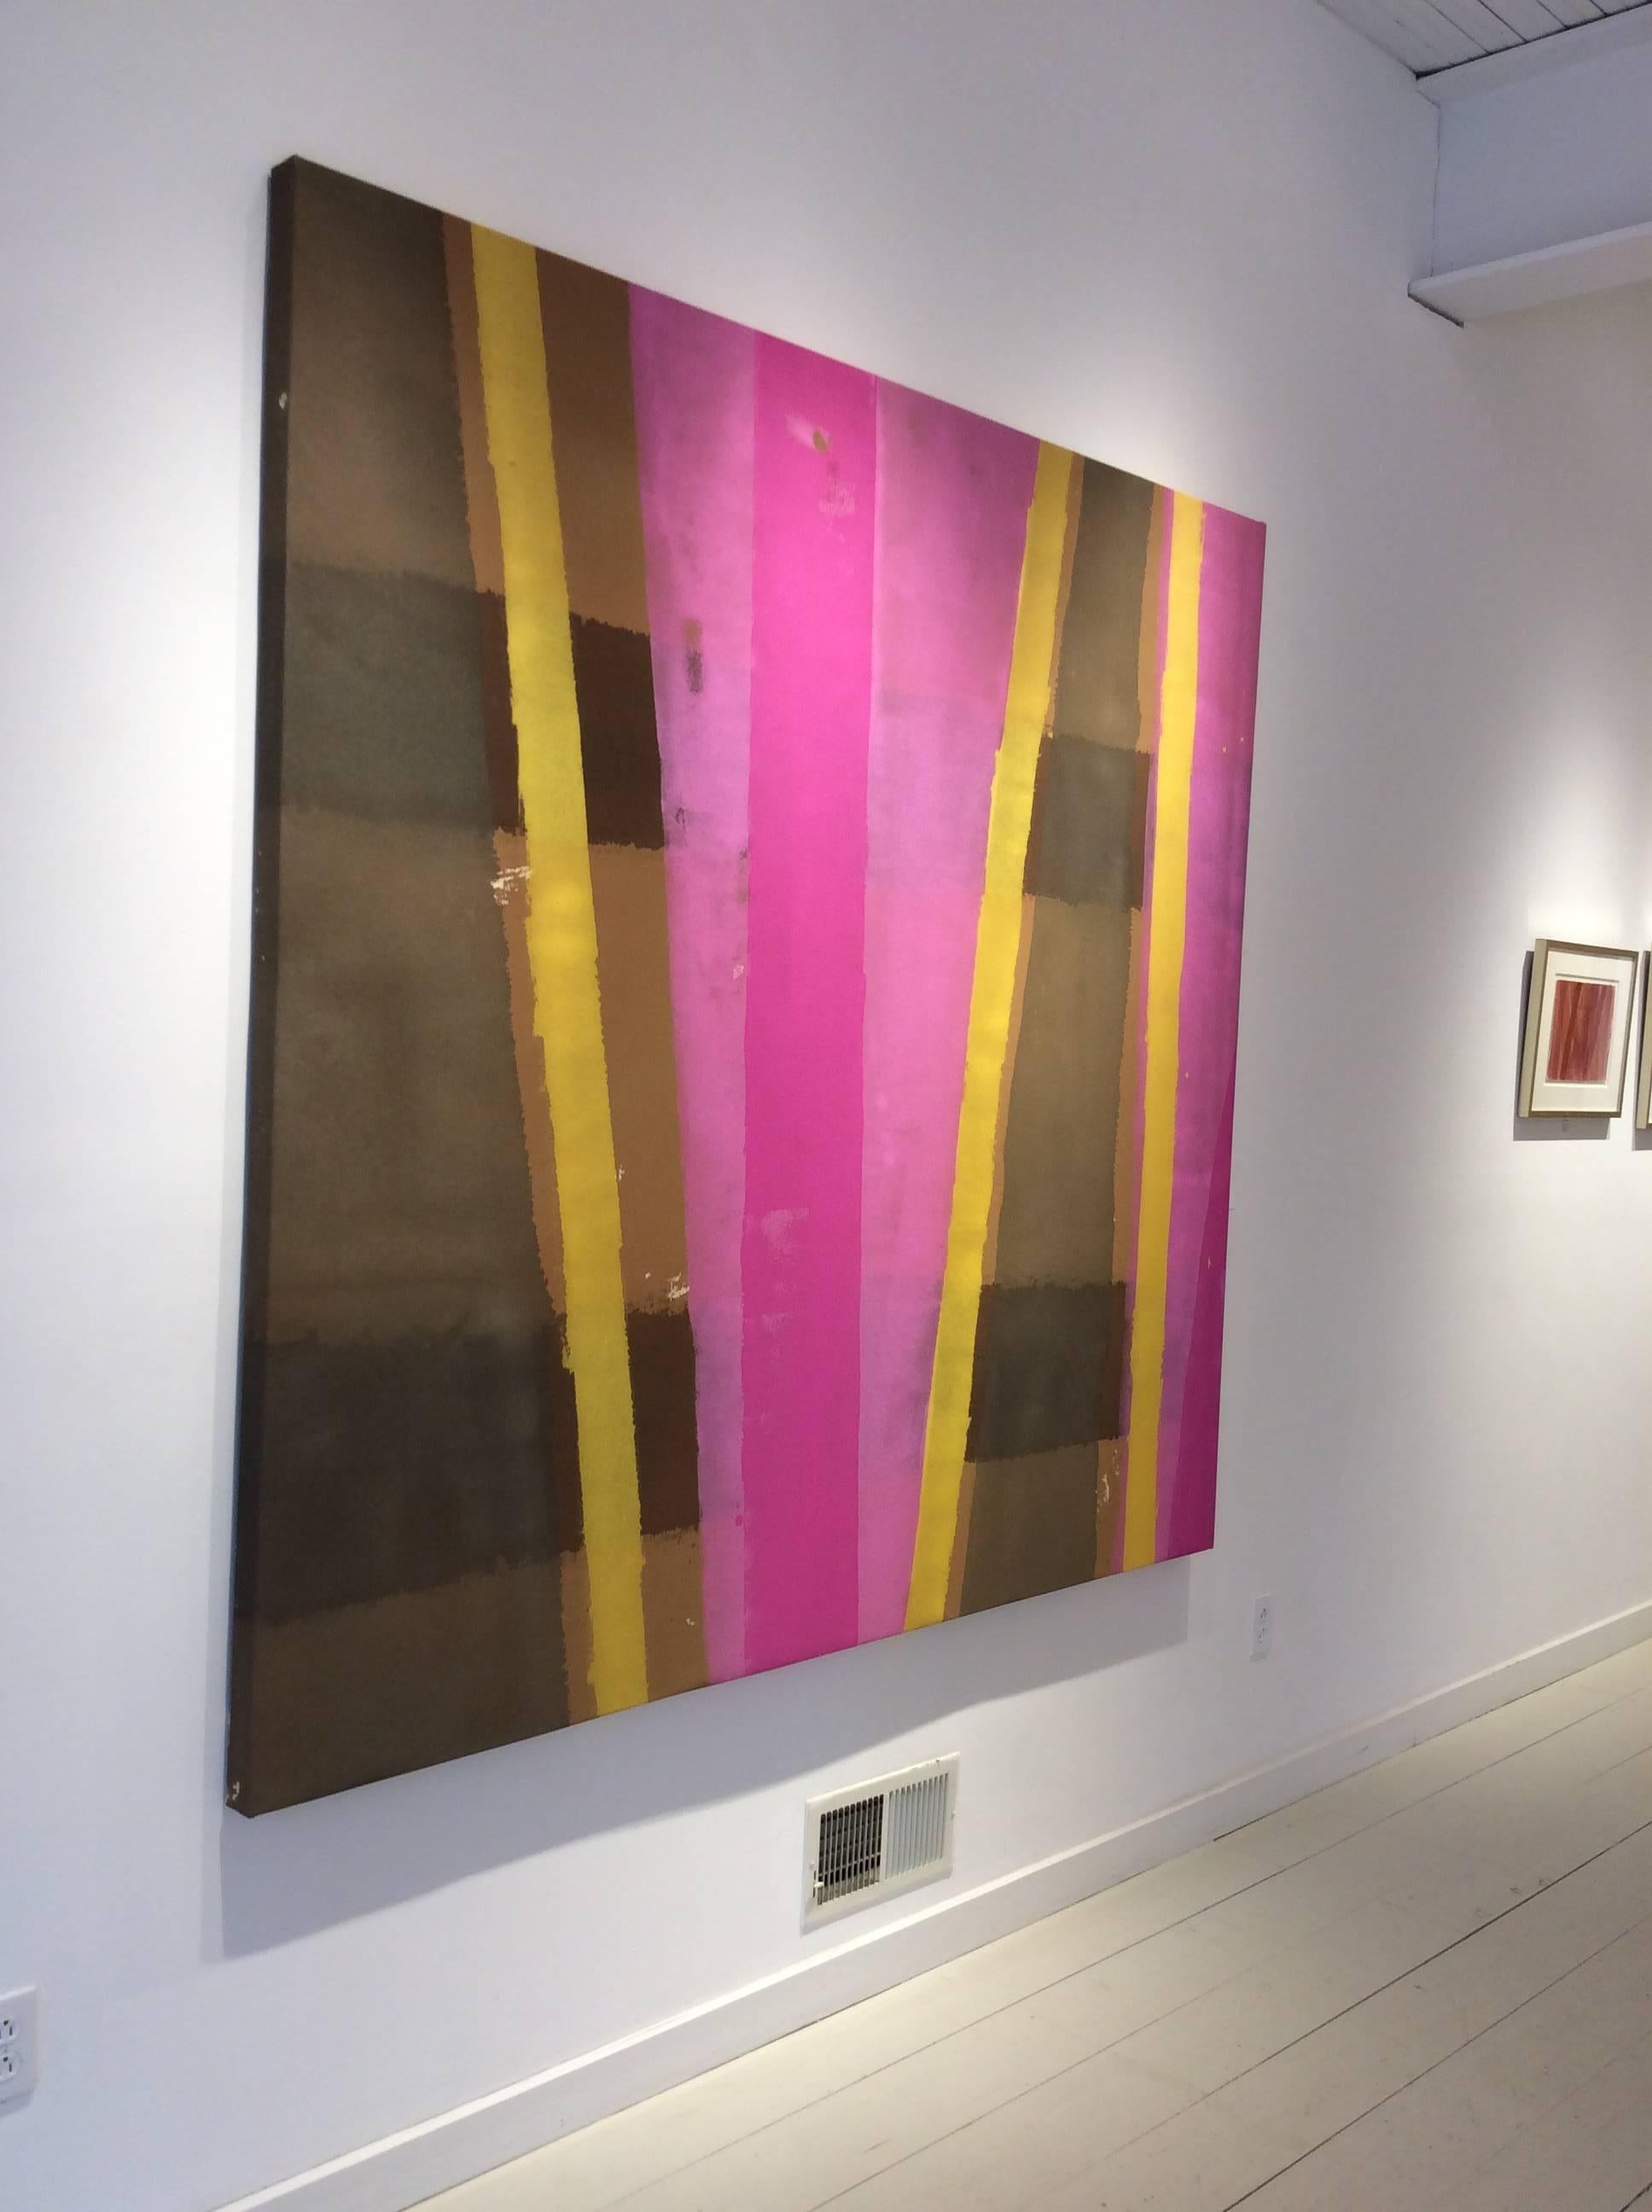 Edward Avedisian: 038 (Abstract Colorfield Painting with veils of Pink, Brown & Yellow) c. 1969
76 x 72 inches, acrylic on stretched canvas

Armenian-American artist, Avedisian was best known for his work made in New York City during the 1960s: